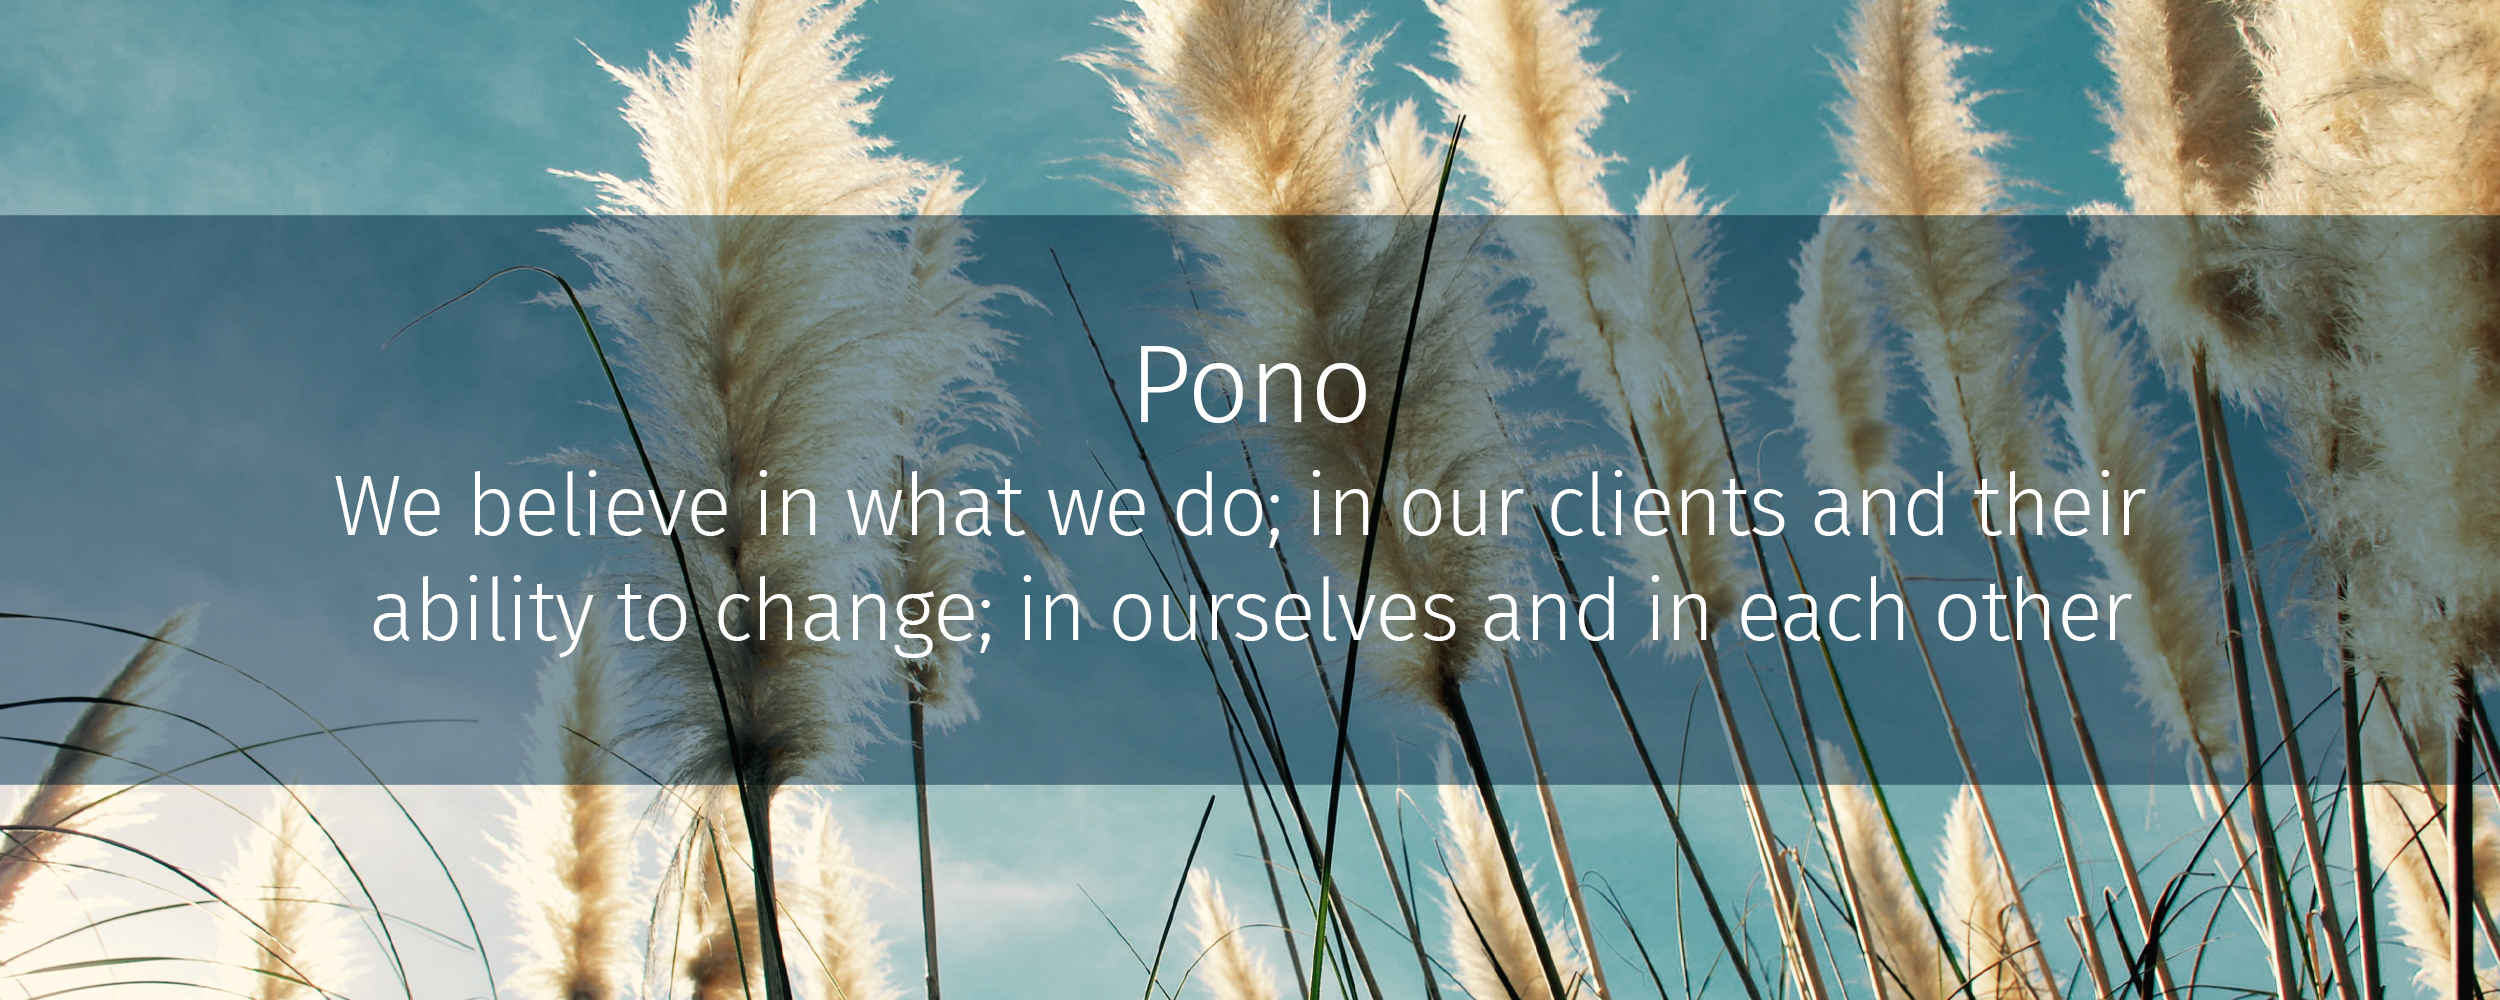 Pono: we believe in what we do; in our clients and their ability to change; in ourselves and in each other